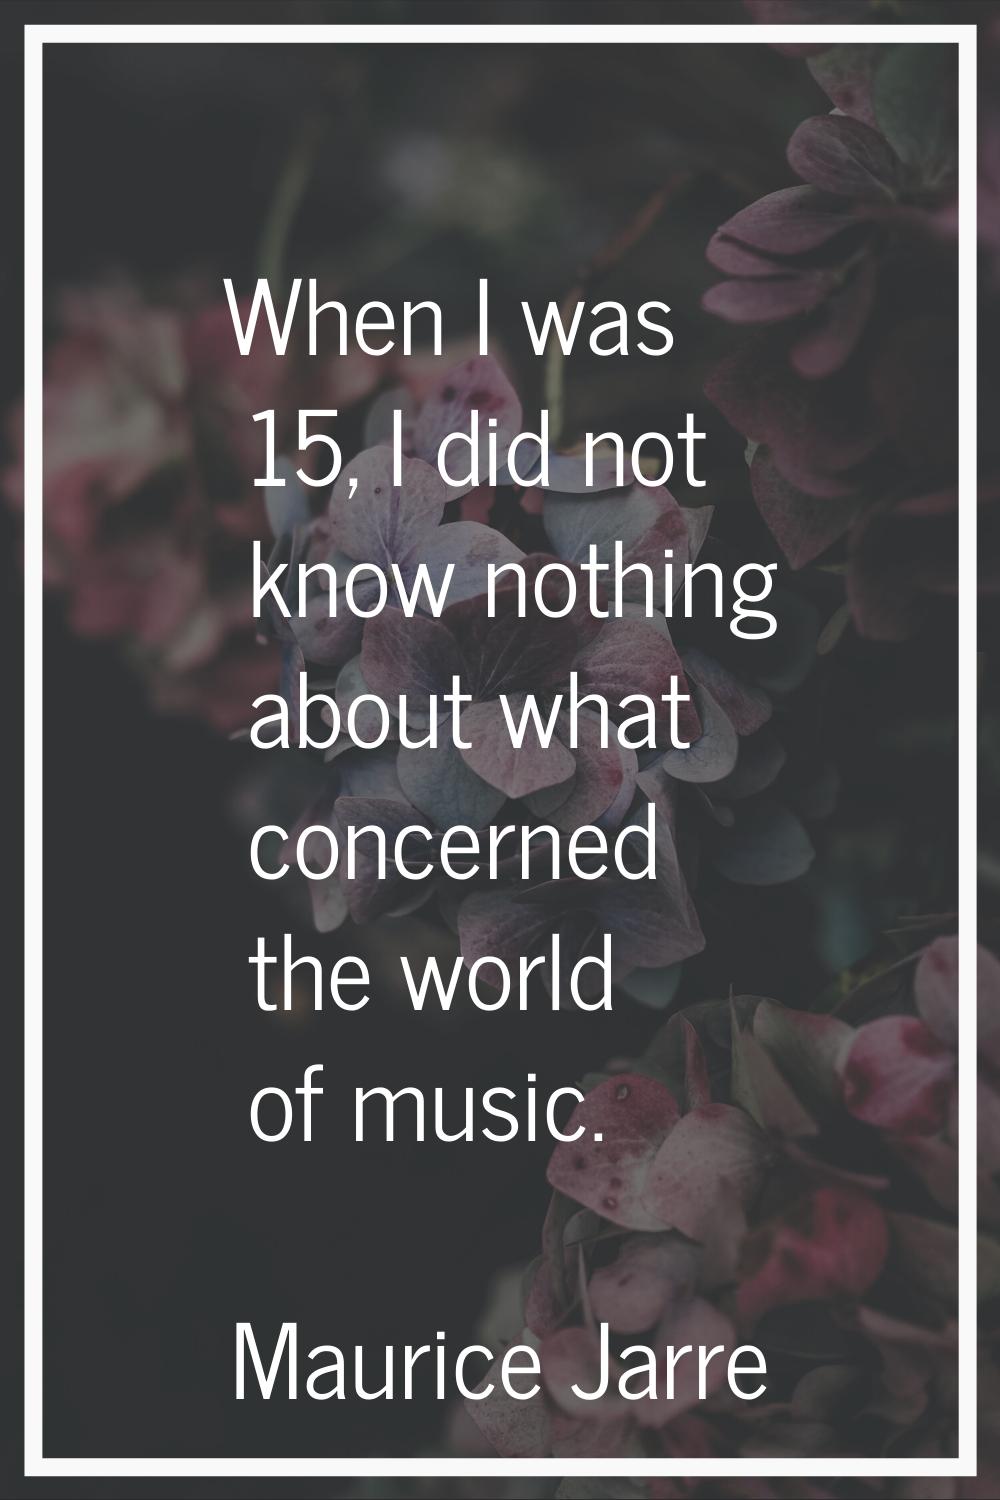 When I was 15, I did not know nothing about what concerned the world of music.